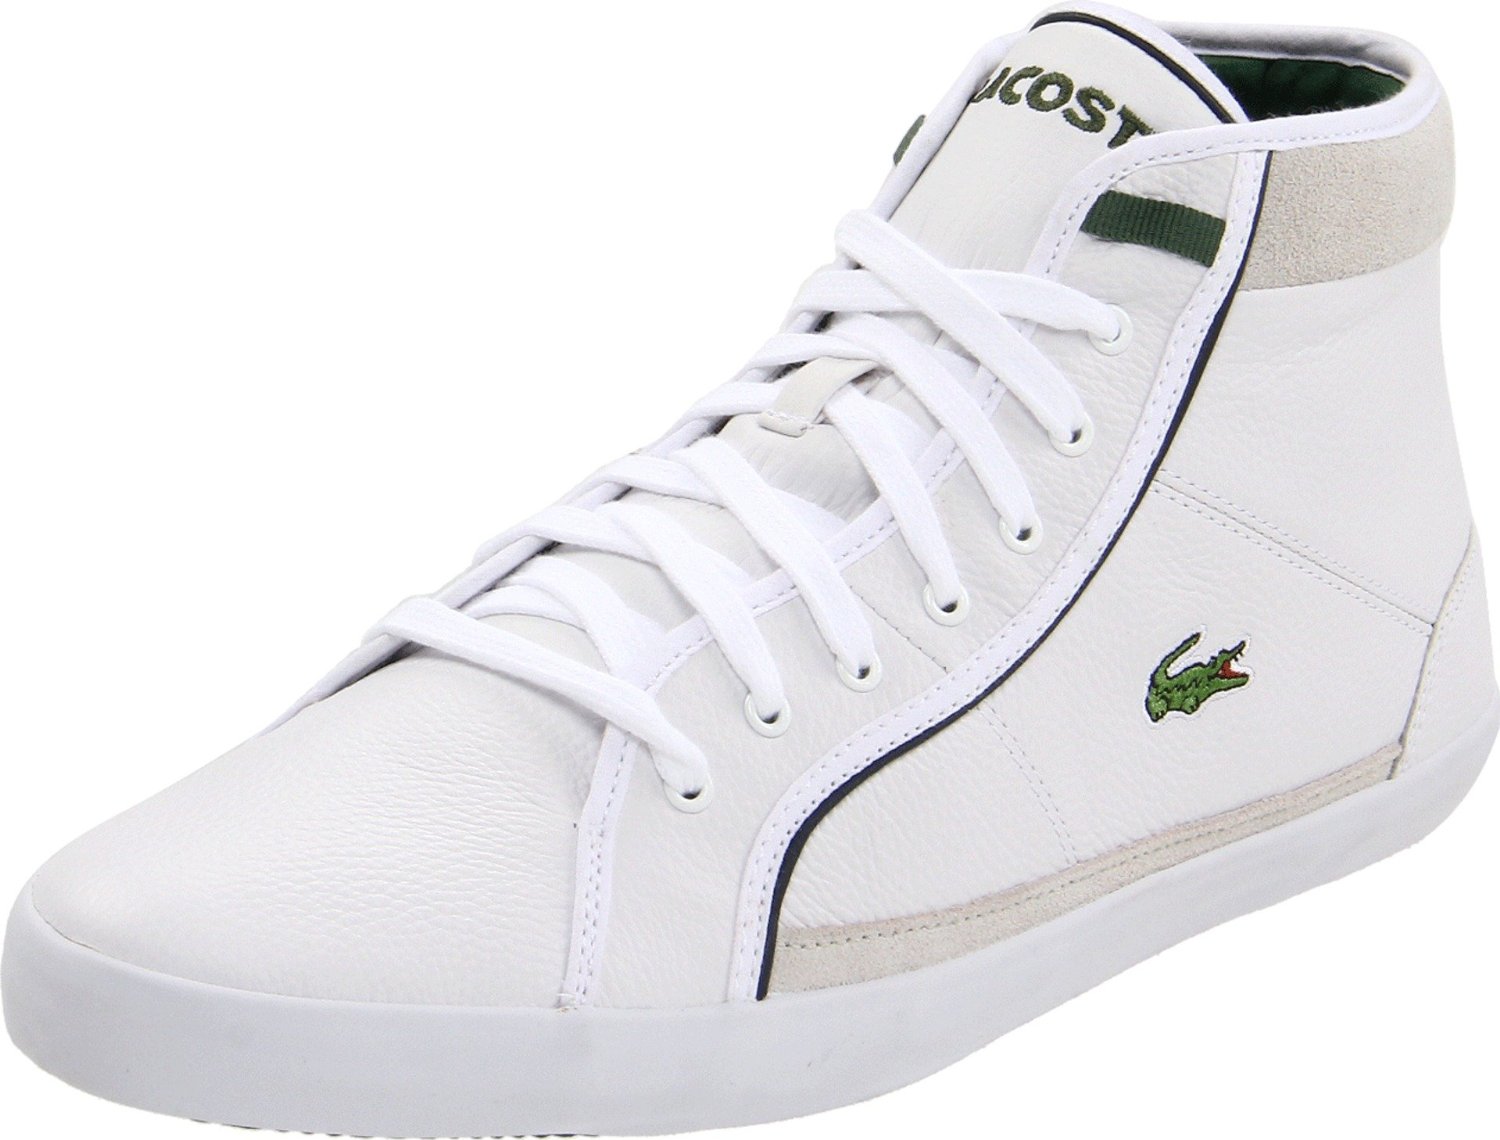 Lacoste Rugosa Hi Top Sneakers in White for Men (white/grey) | Lyst